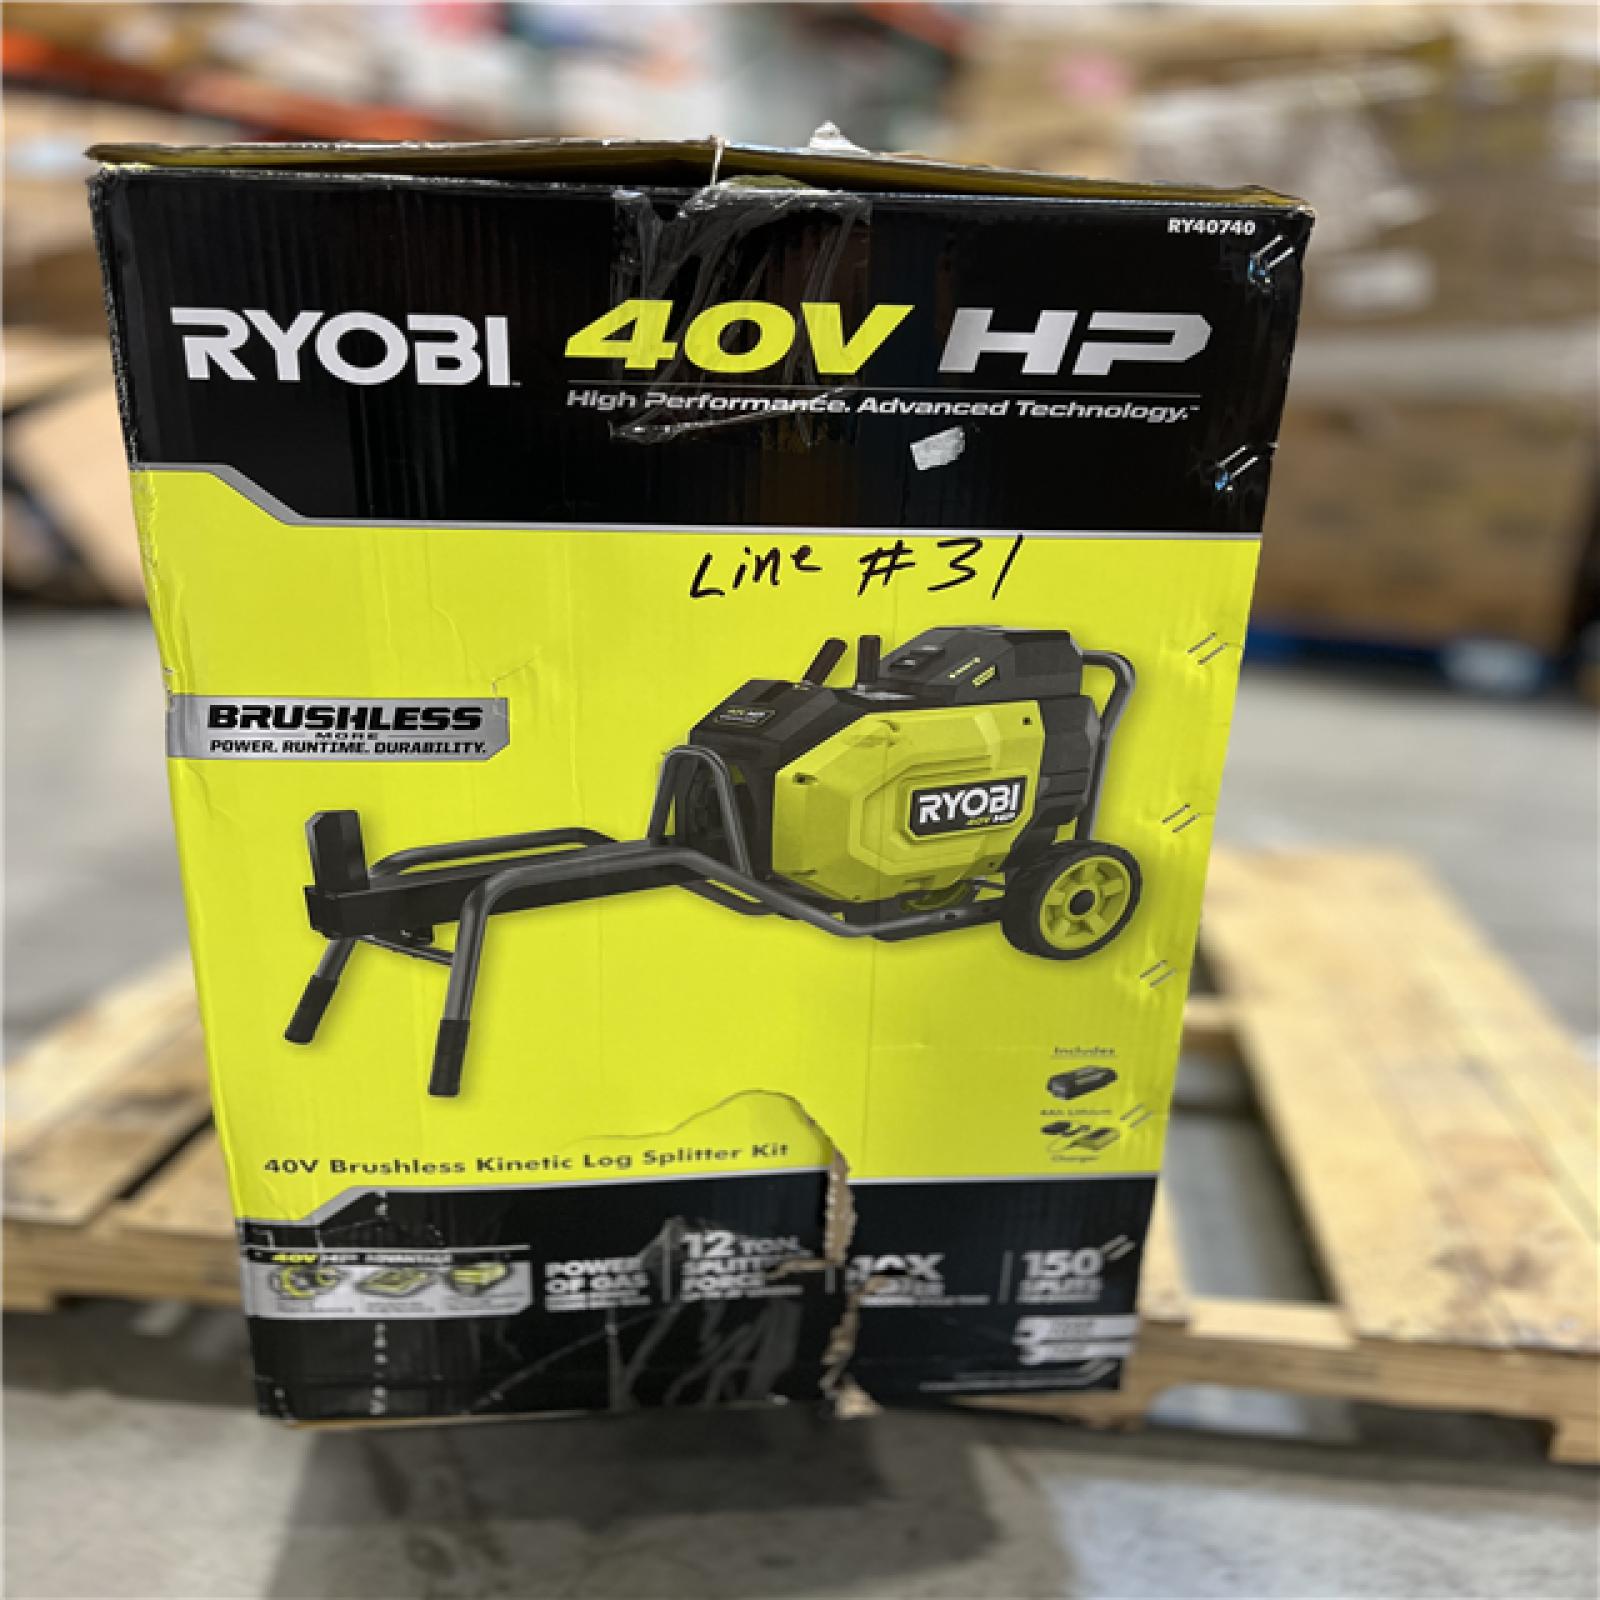 DALLAS LOCATION- NEW! RYOBI 40V HP Brushless 12-Ton Kinetic Battery Electric Log Splitter Kit - 4.0Ah Battery and Charger Included